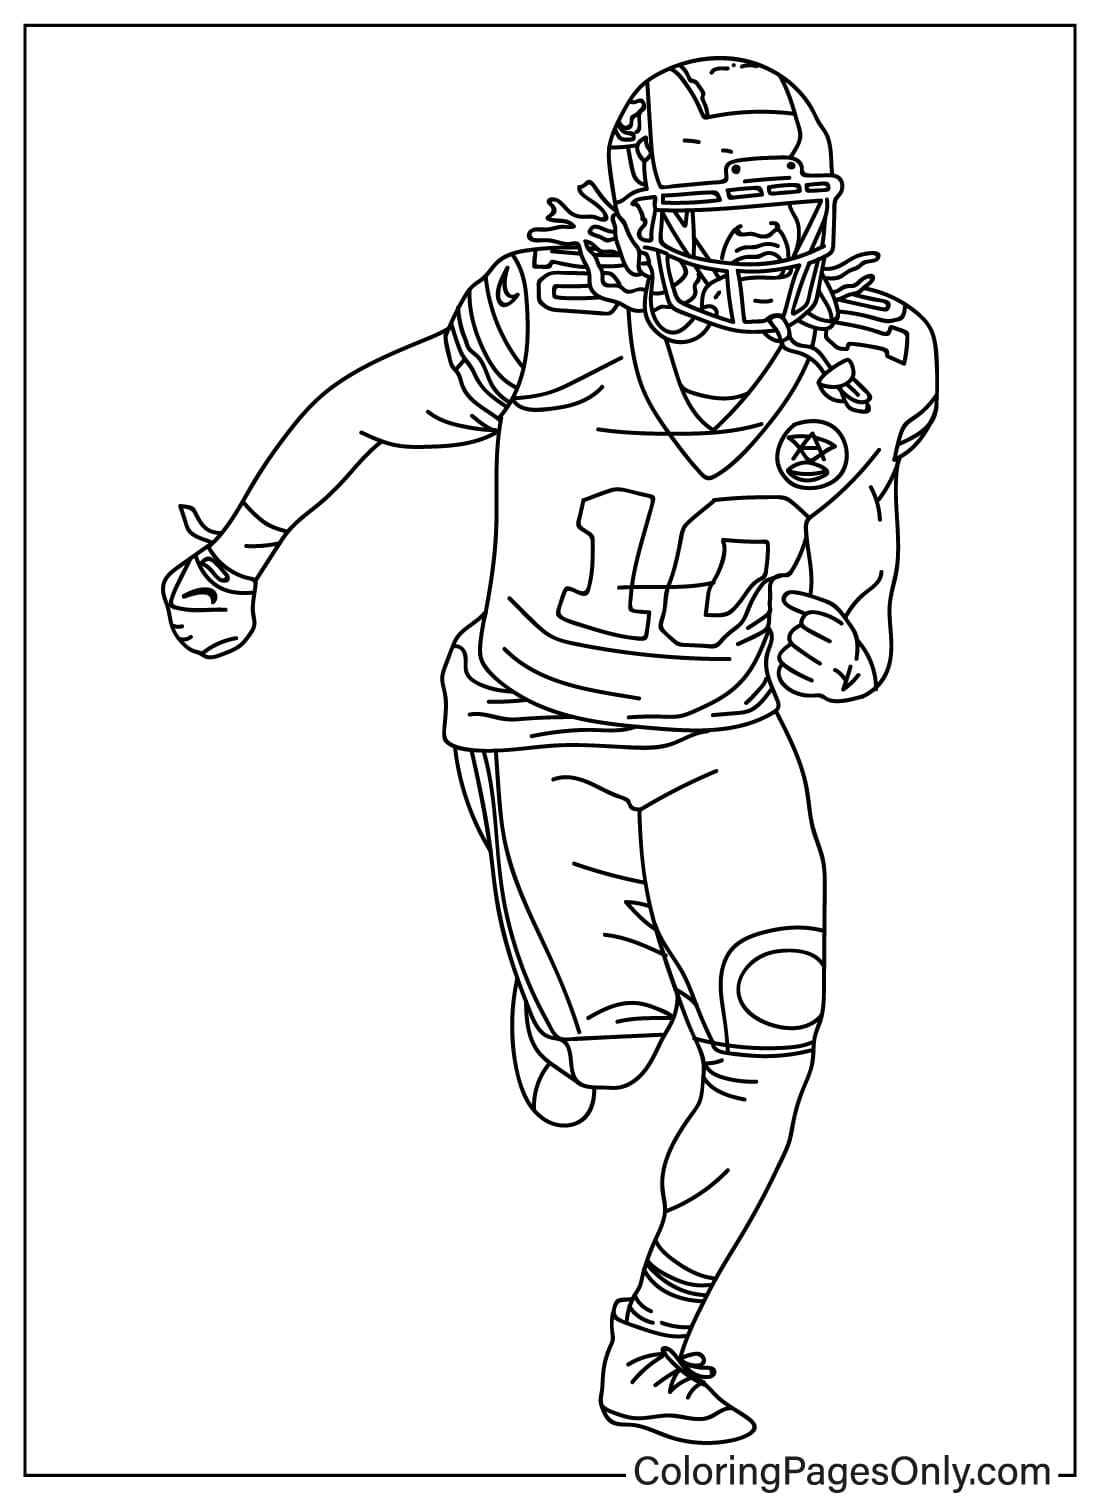 Isiah Pacheco Coloring Page - Free Printable Coloring Pages